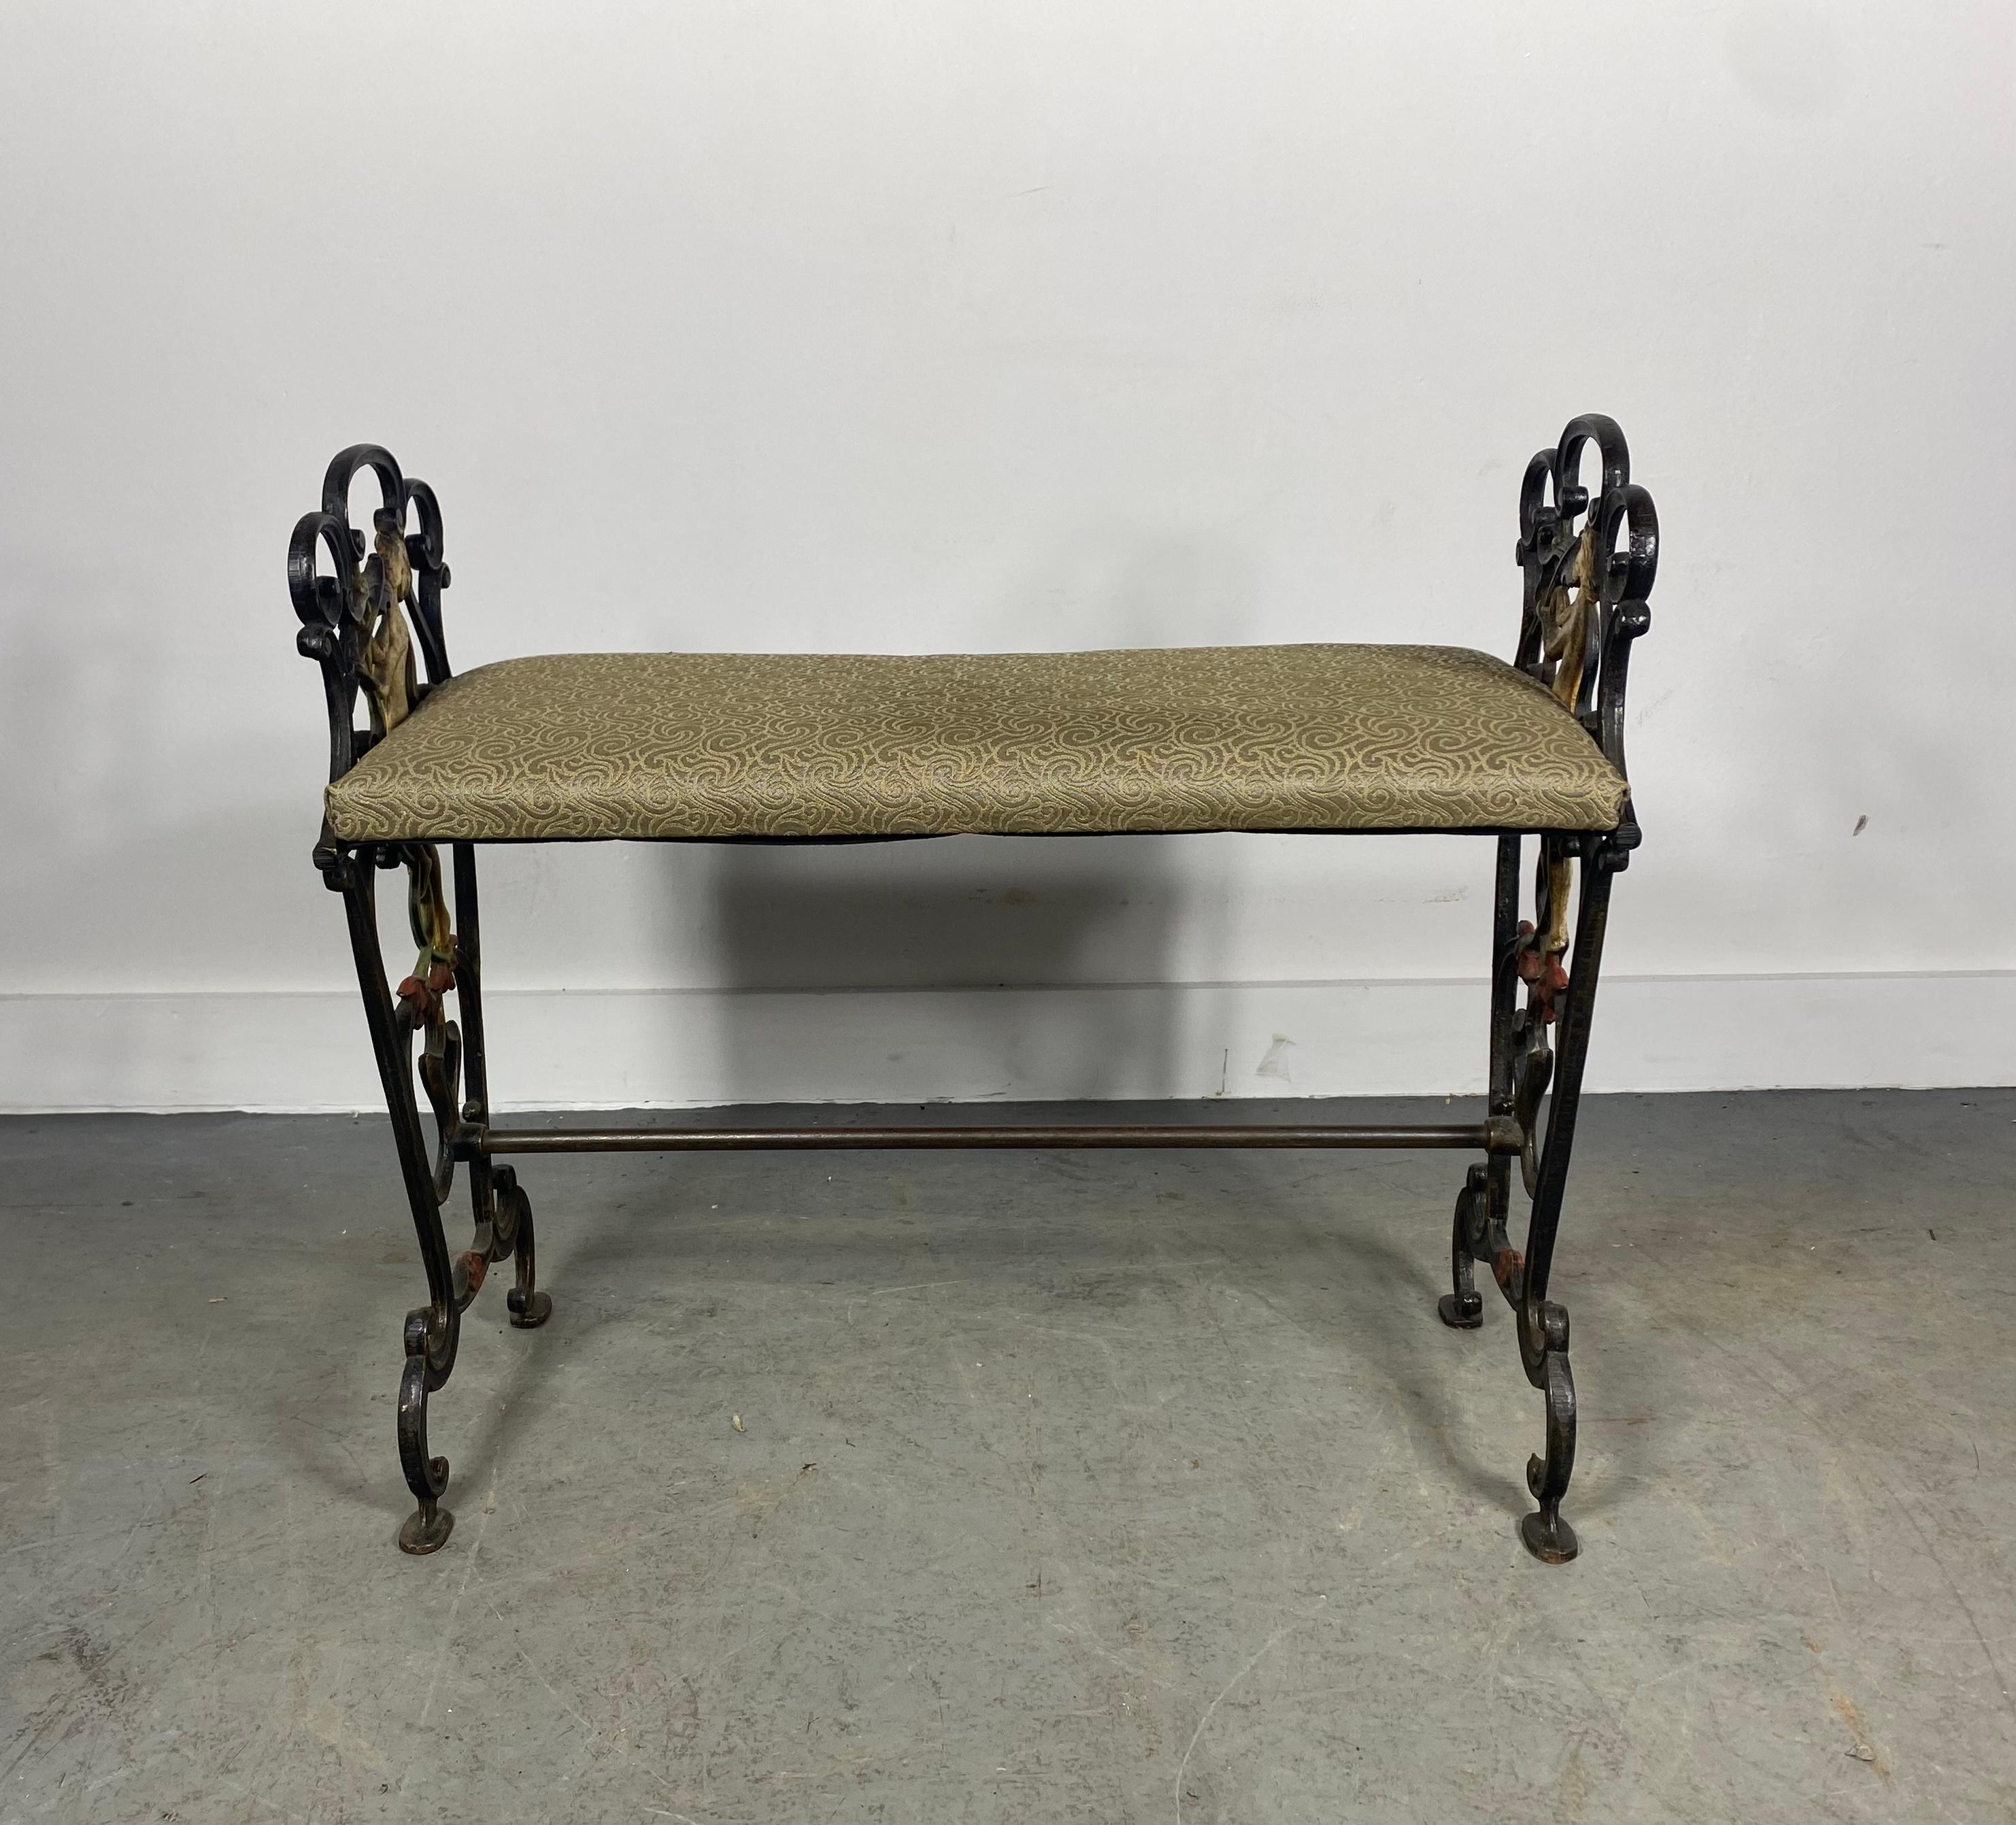 Art Deco / Nouveau Cast Iron Bench, Figural Violinist Motif, Painted In Good Condition For Sale In Buffalo, NY